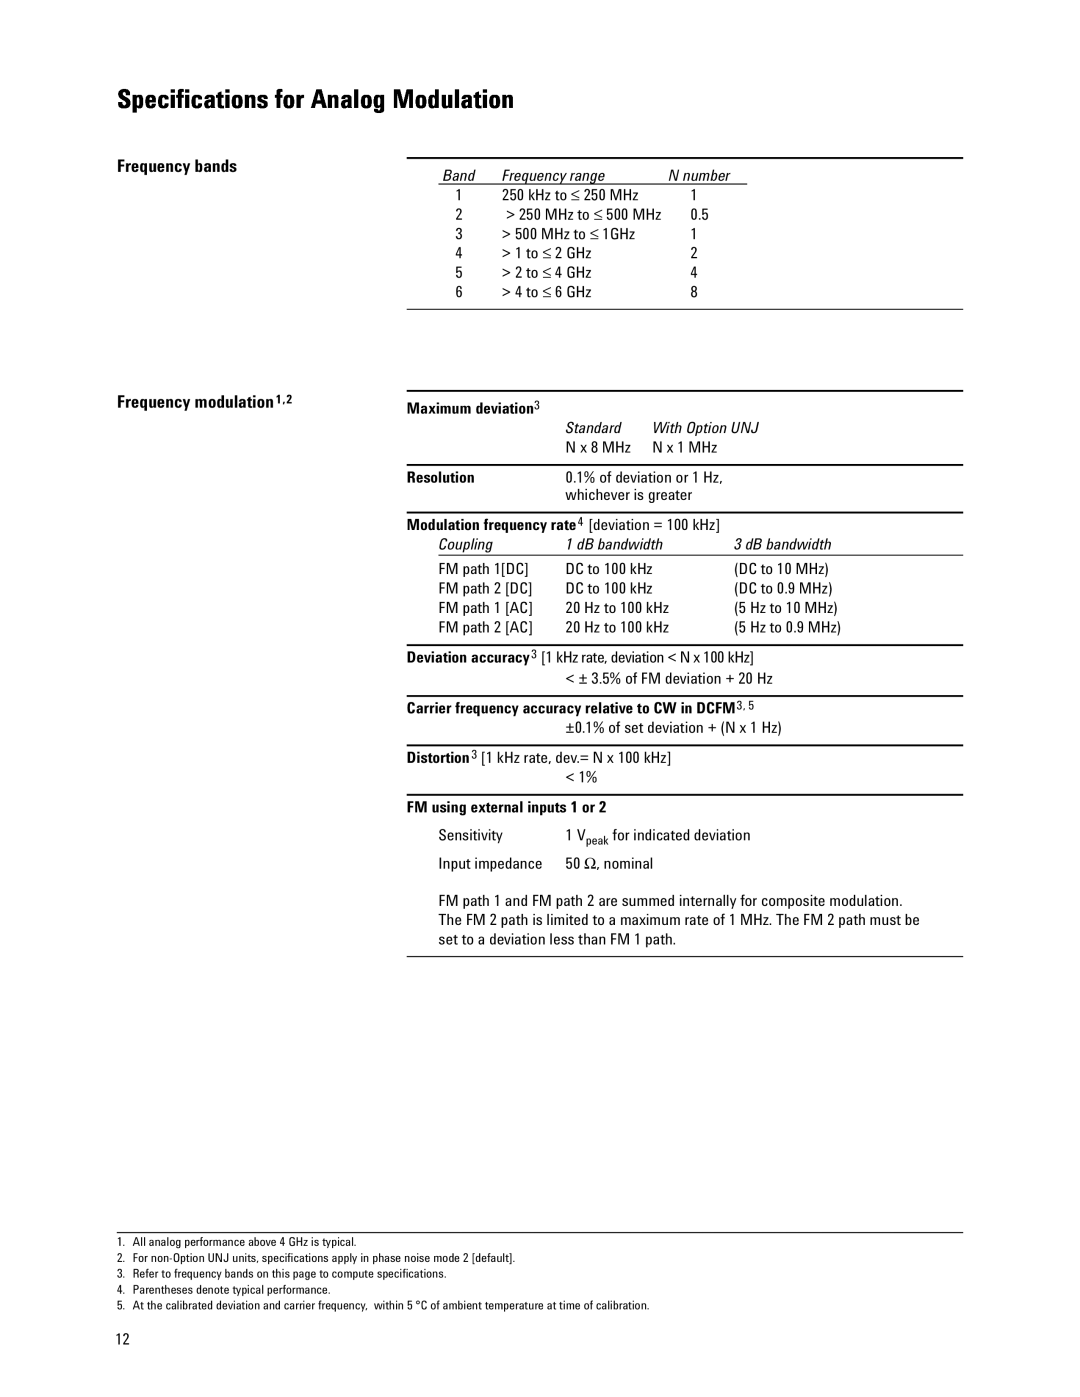 Agilent Technologies E4438C manual Specifications for Analog Modulation, Frequency bands, Frequency modulation, Resolution 